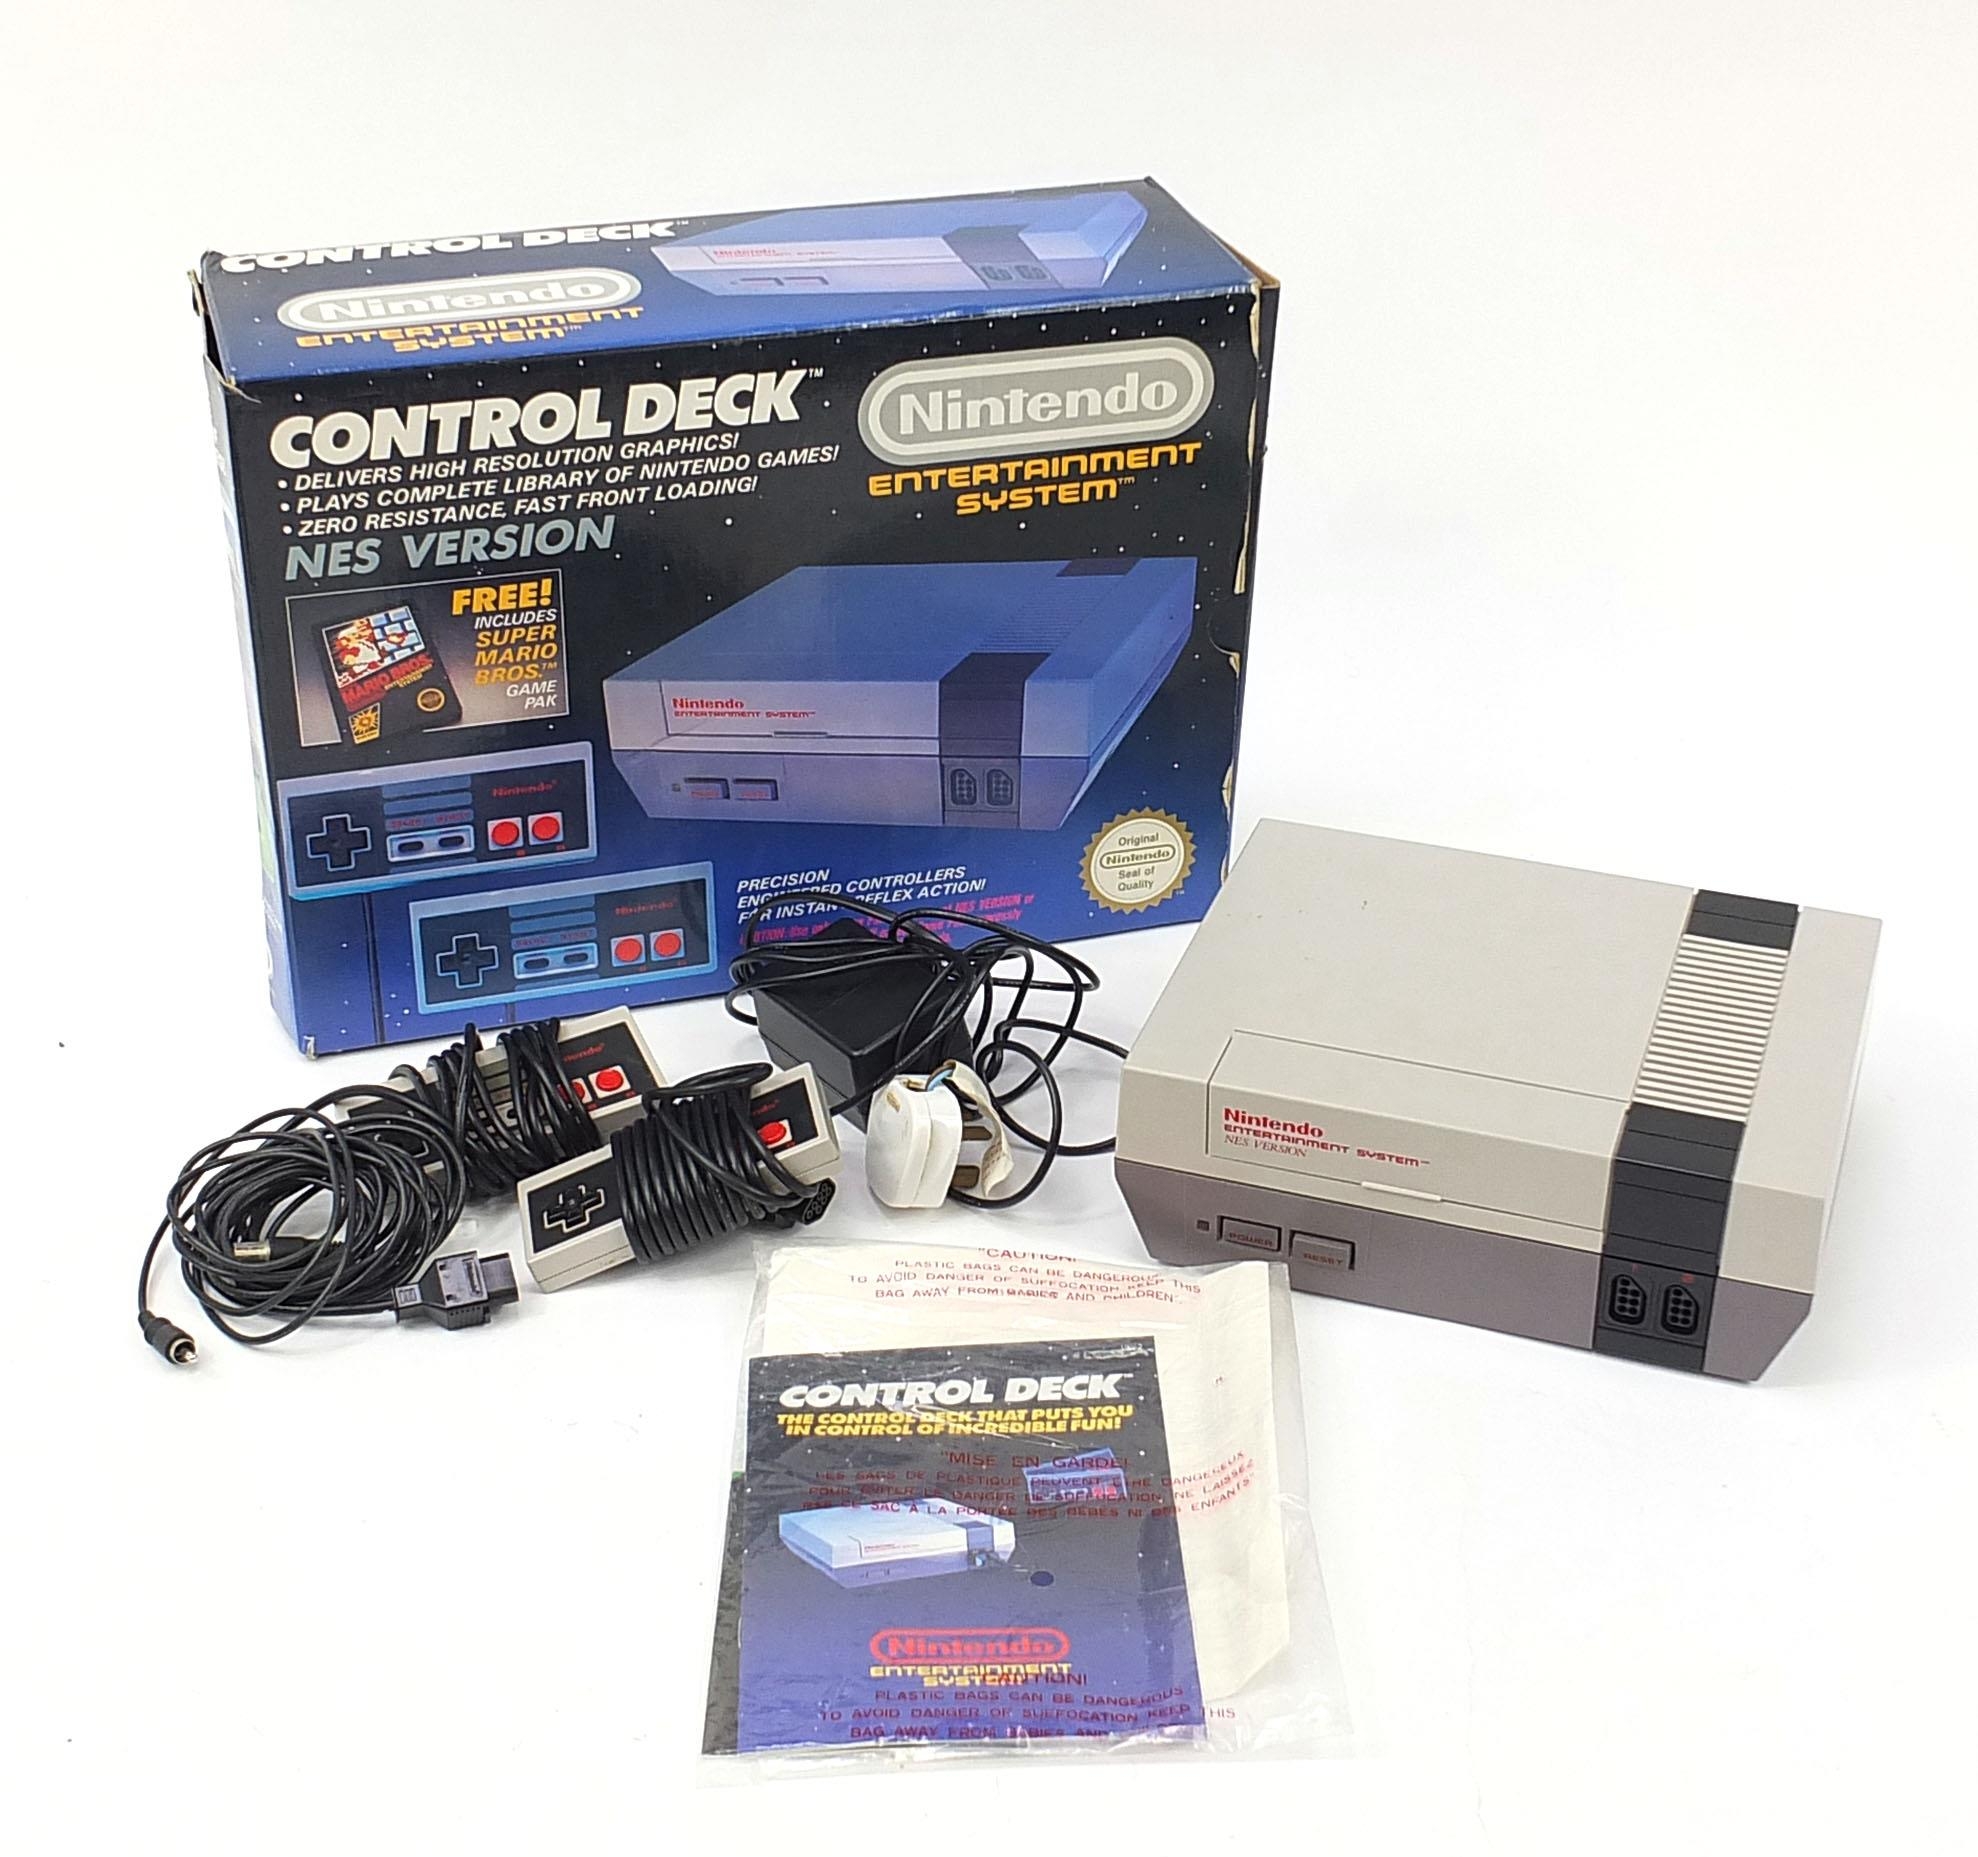 Nintendo control deck entertainment system with box